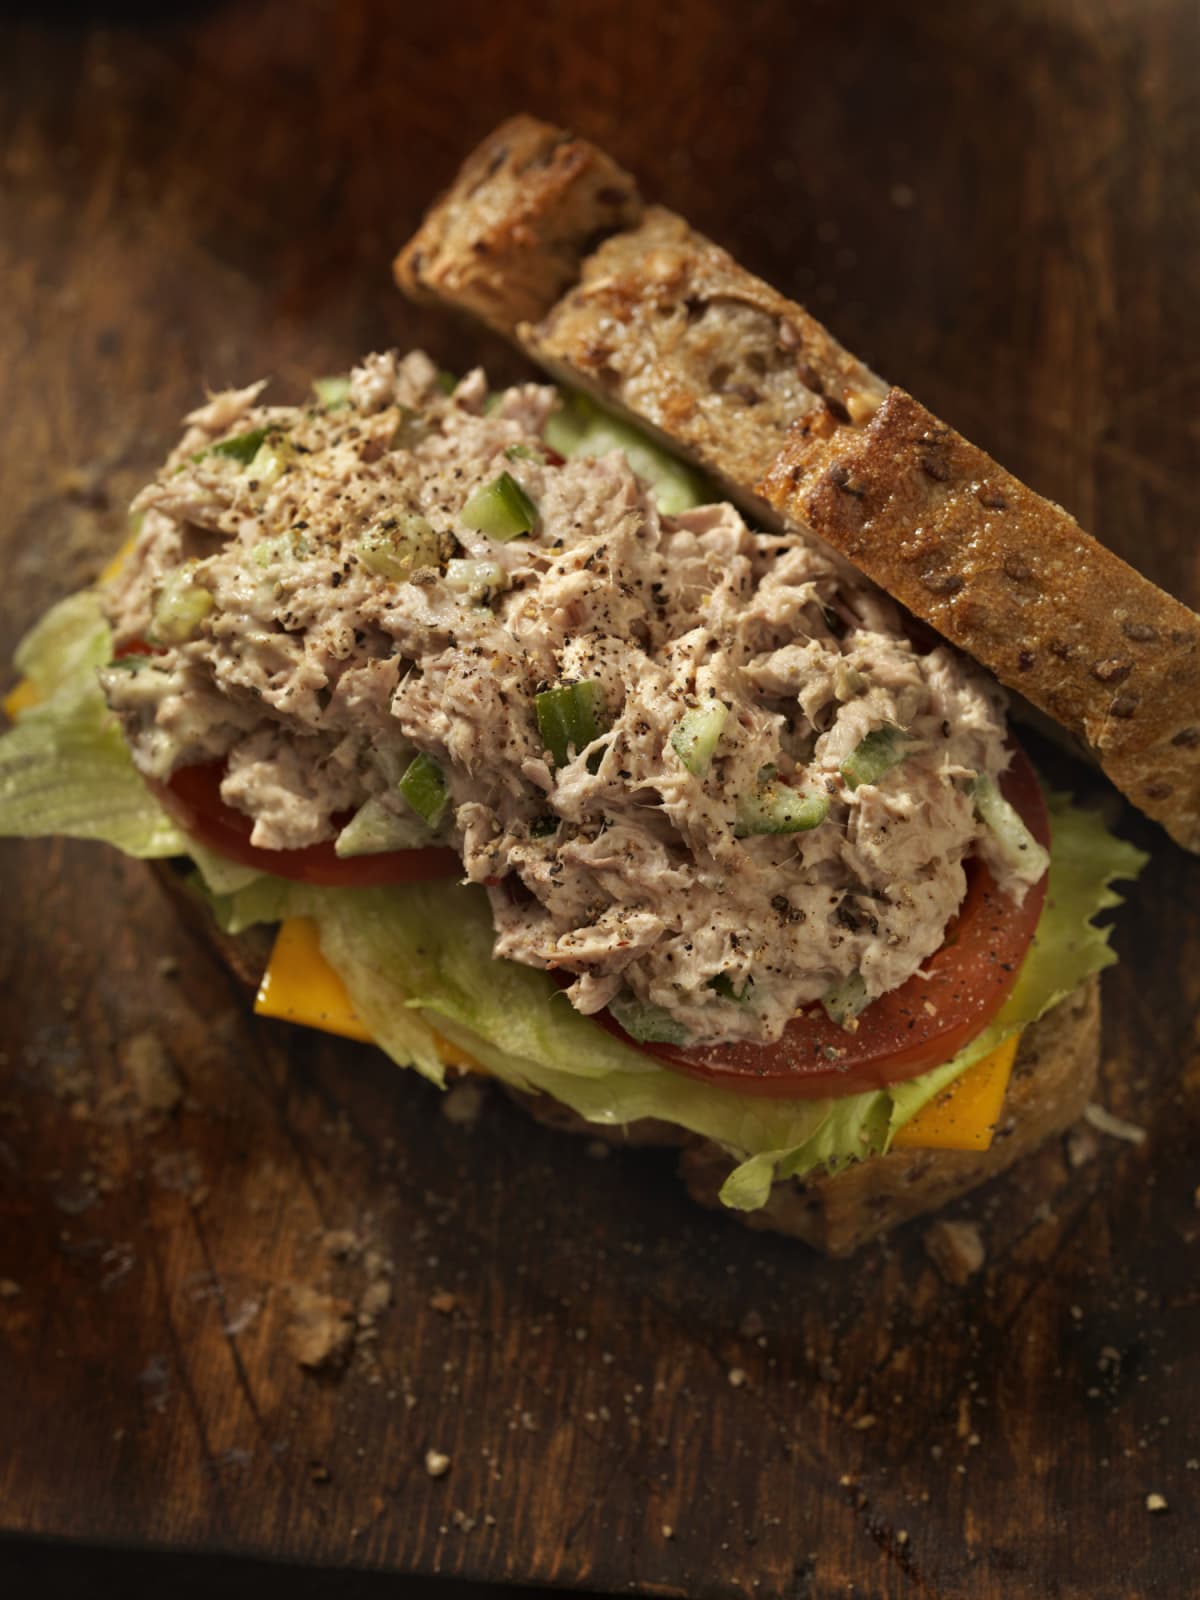 "Close up of a tuna salad sandwich made with mayonnaise, leaf lettuce and whole wheat bread, isolated on white. More tuna sandwich..."